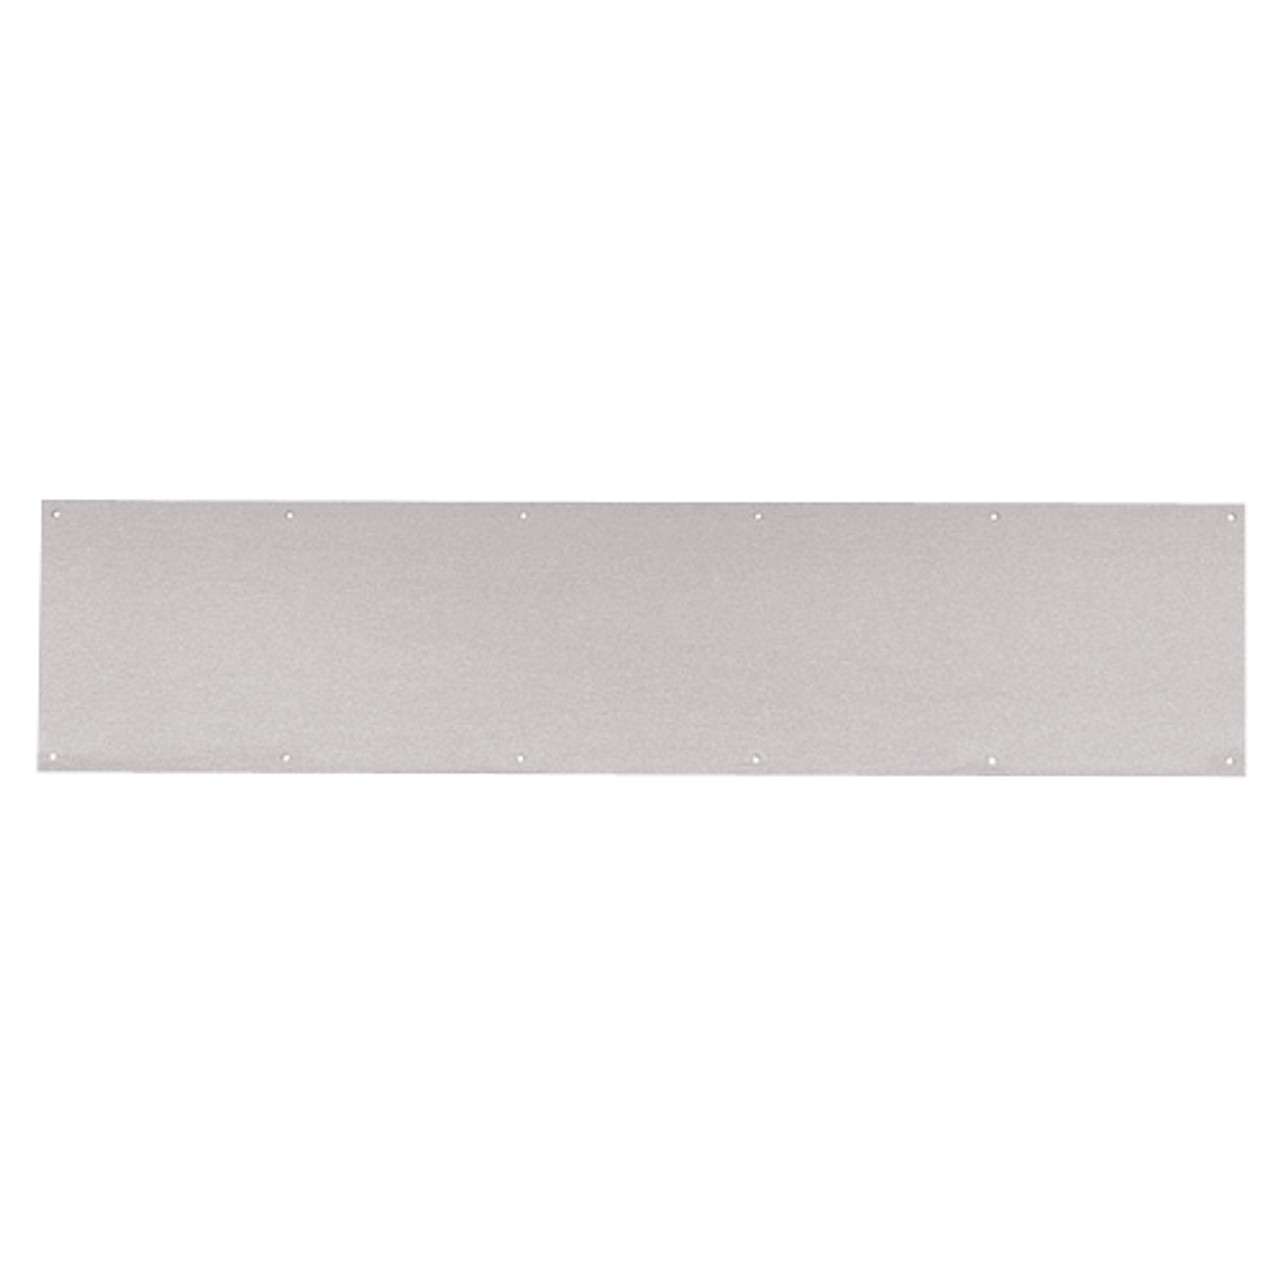 8400-US32D-6x34-B-CS Ives 8400 Series Protection Plate in Satin Stainless Steel